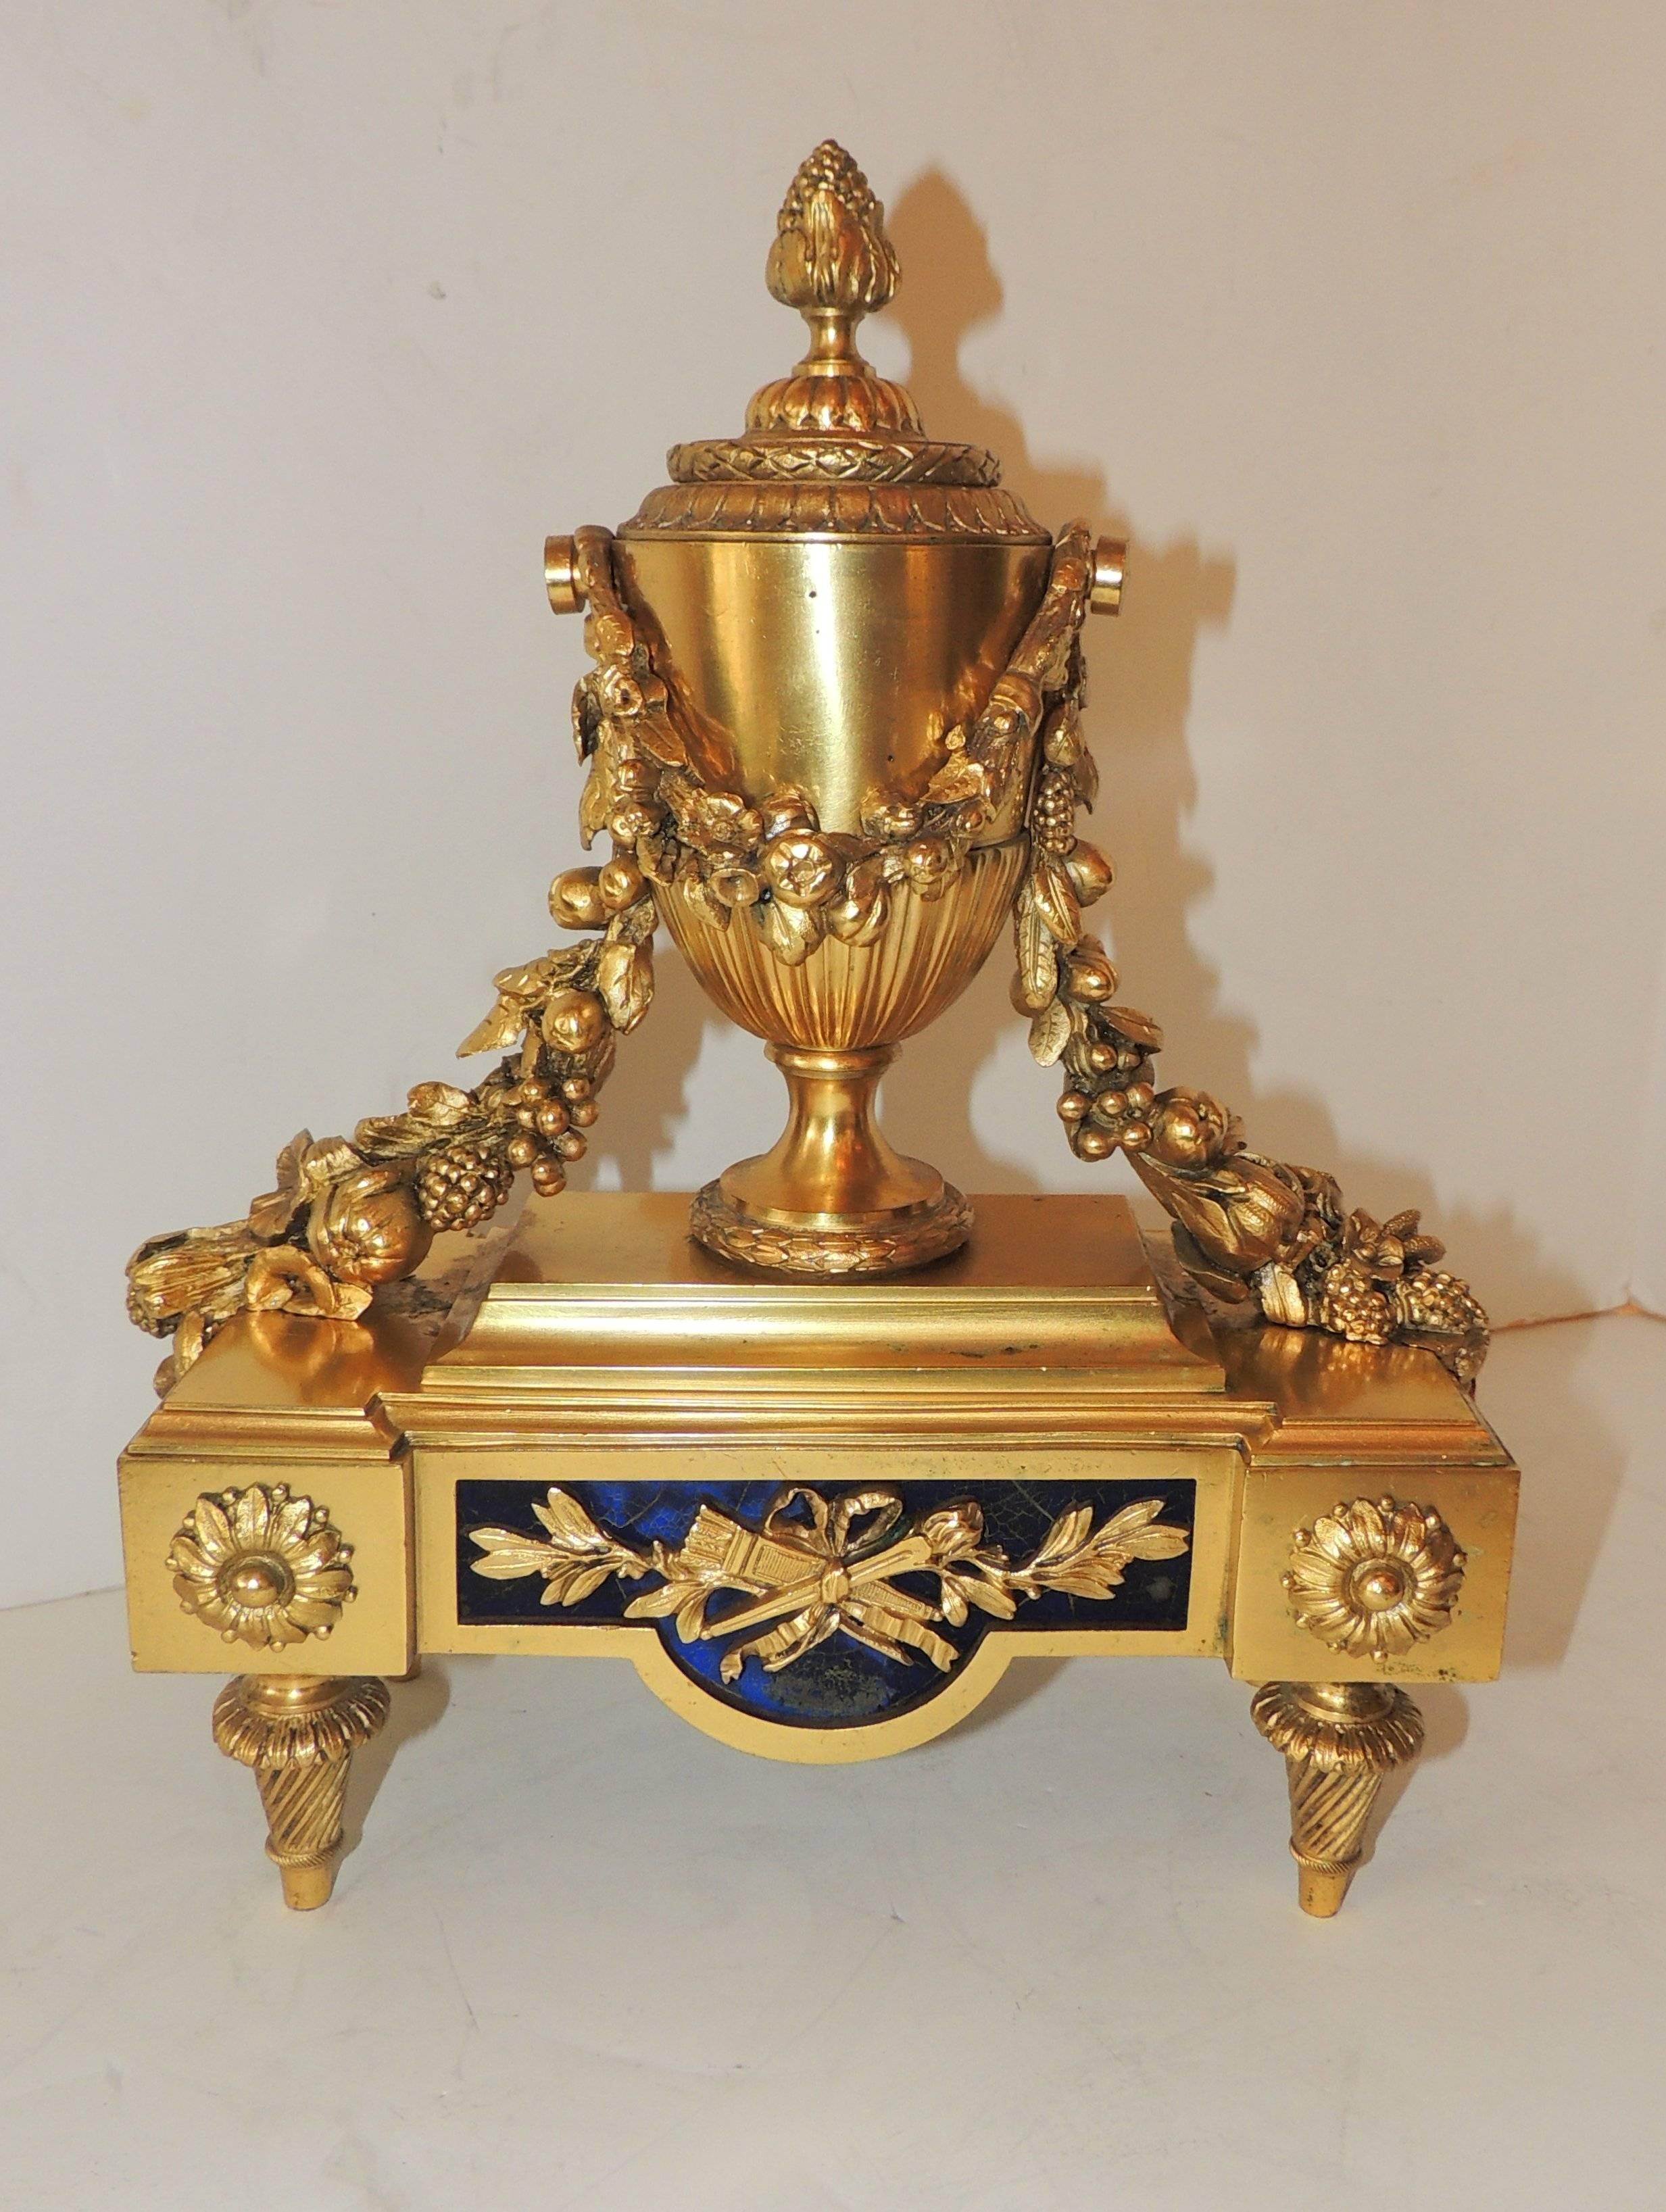 Wonderful French Pair Regency Empire Dore Bronze Chenets Urns Swag Andirons

Measures: 10.5" W x 14" H x 5" D.
  